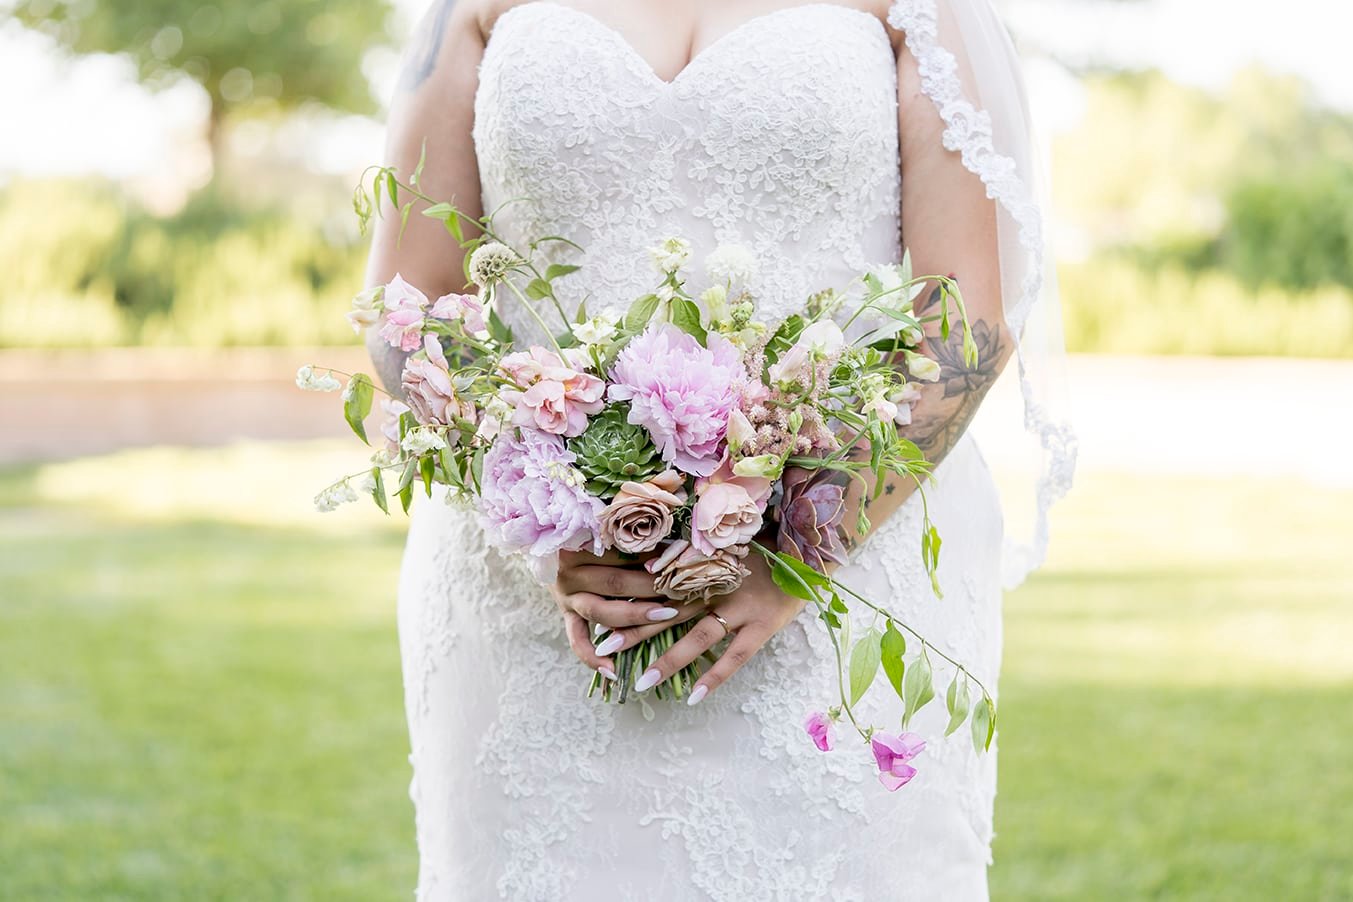 Bride holding a bouquet at Roblar Winery in Santa Ynez, CA